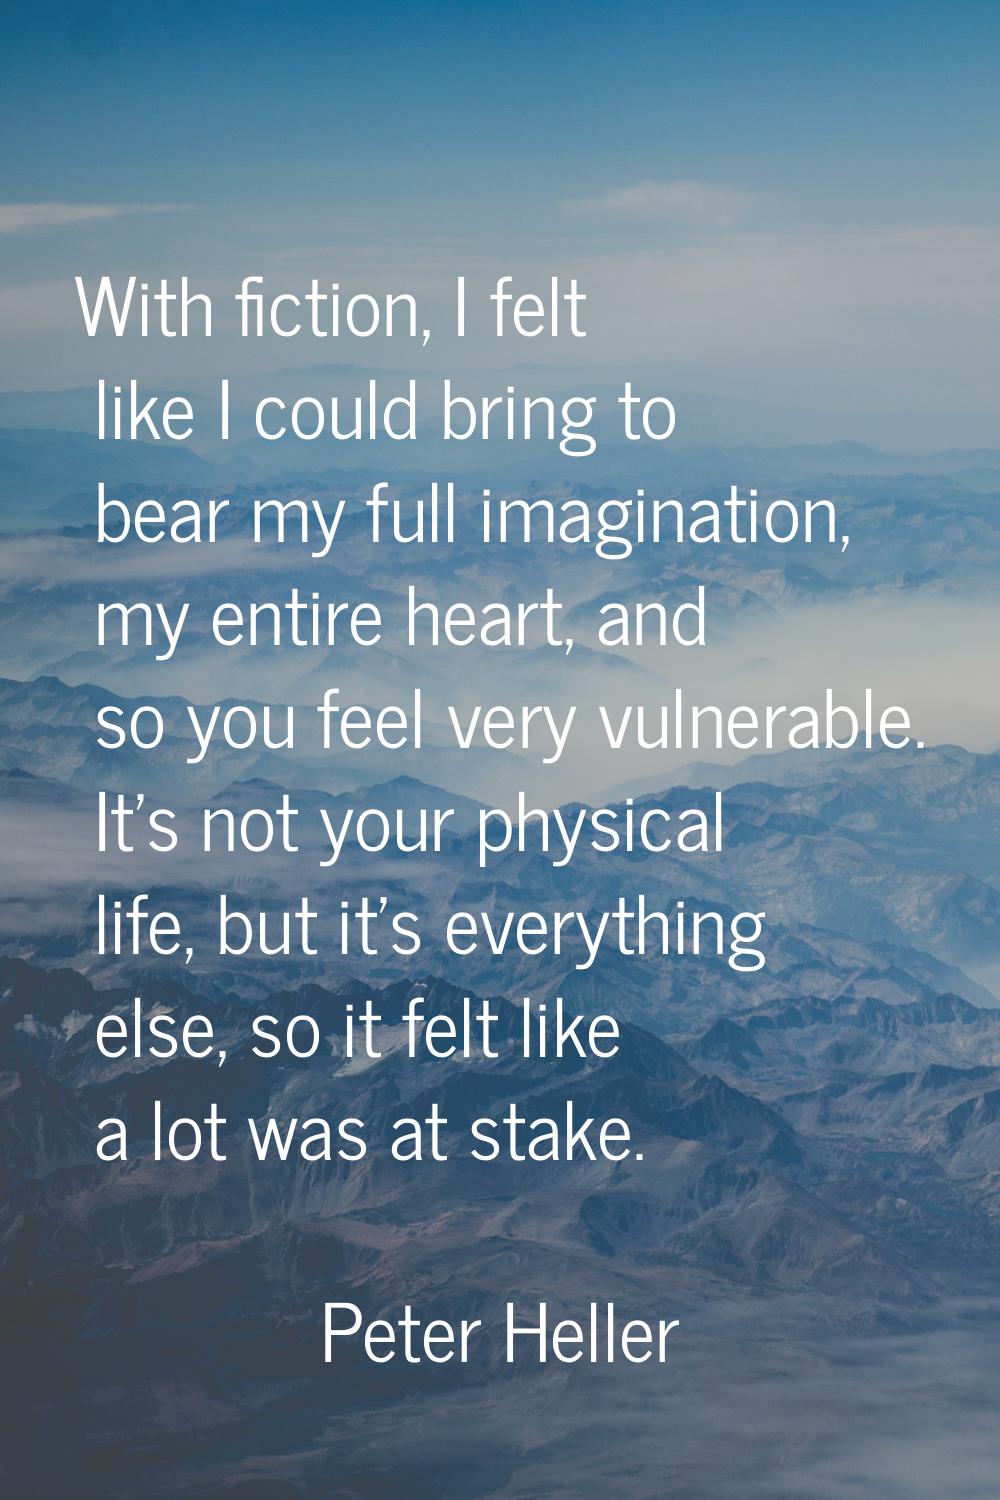 With fiction, I felt like I could bring to bear my full imagination, my entire heart, and so you fe